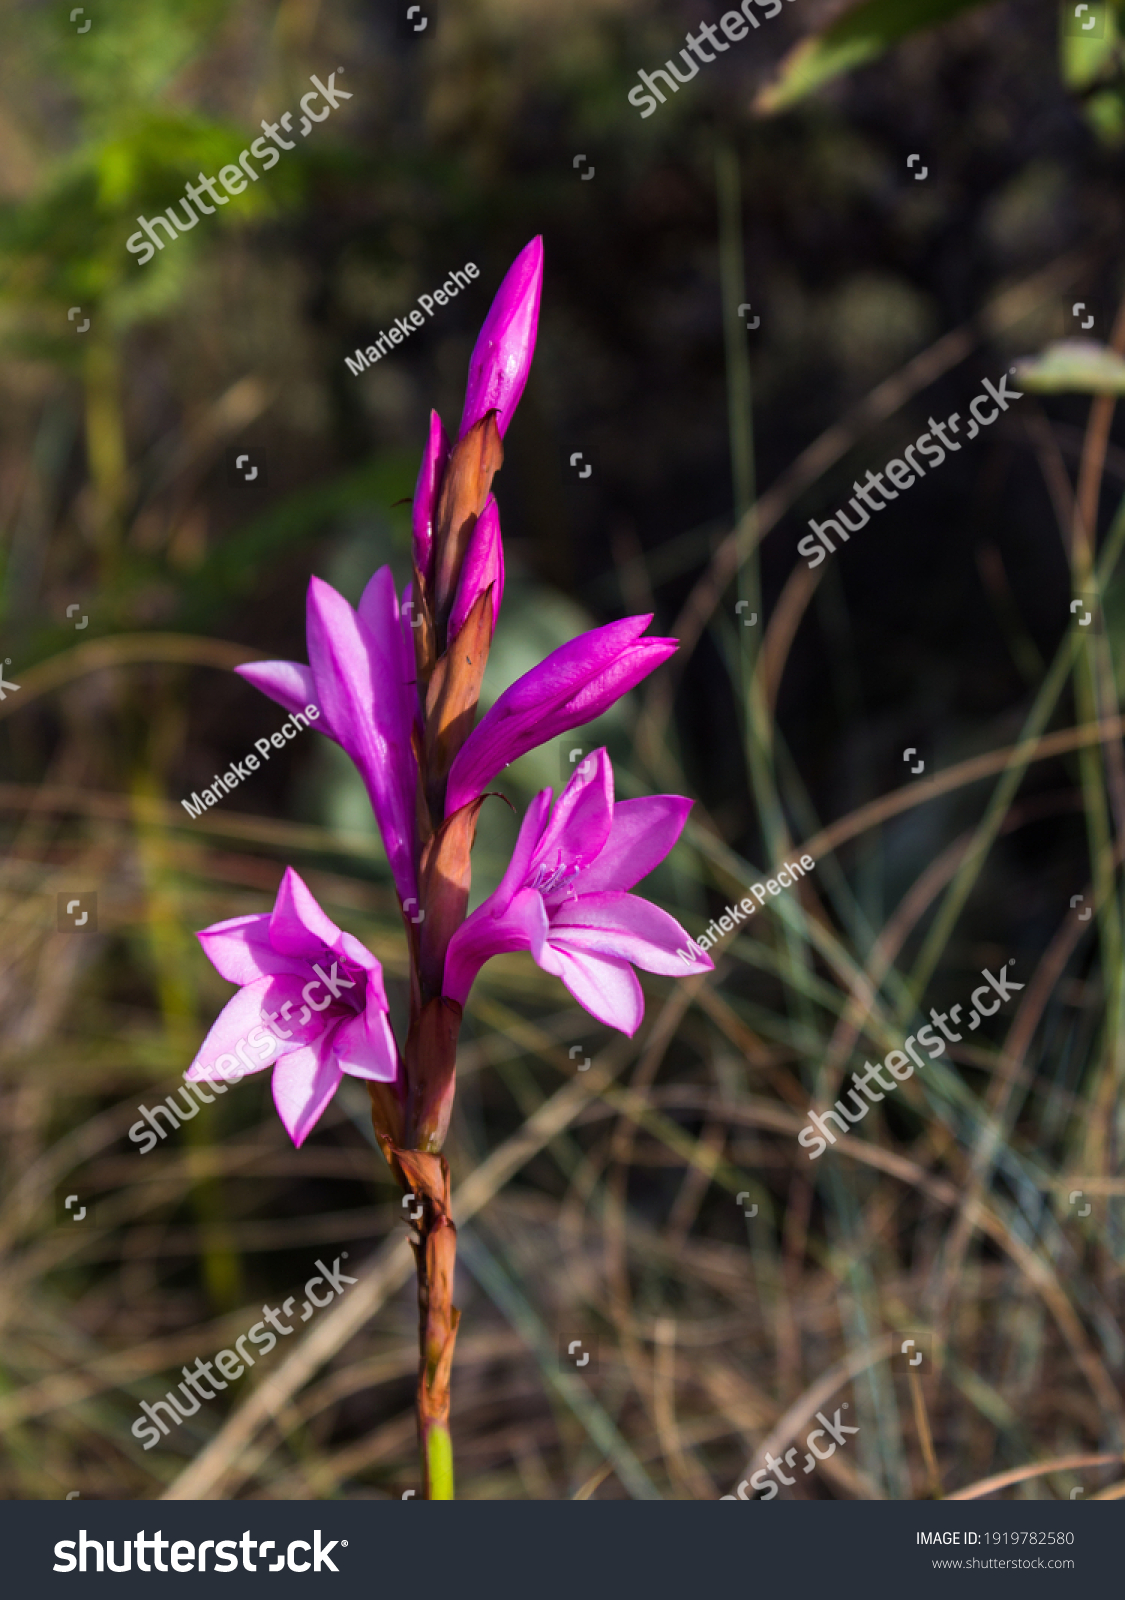 The purple Florescence of the Drakensberg Watsonia, Watsonia Lepida, in the Afromontane Grasslands of the Central Drakensberg Mountains, South Africa. #1919782580